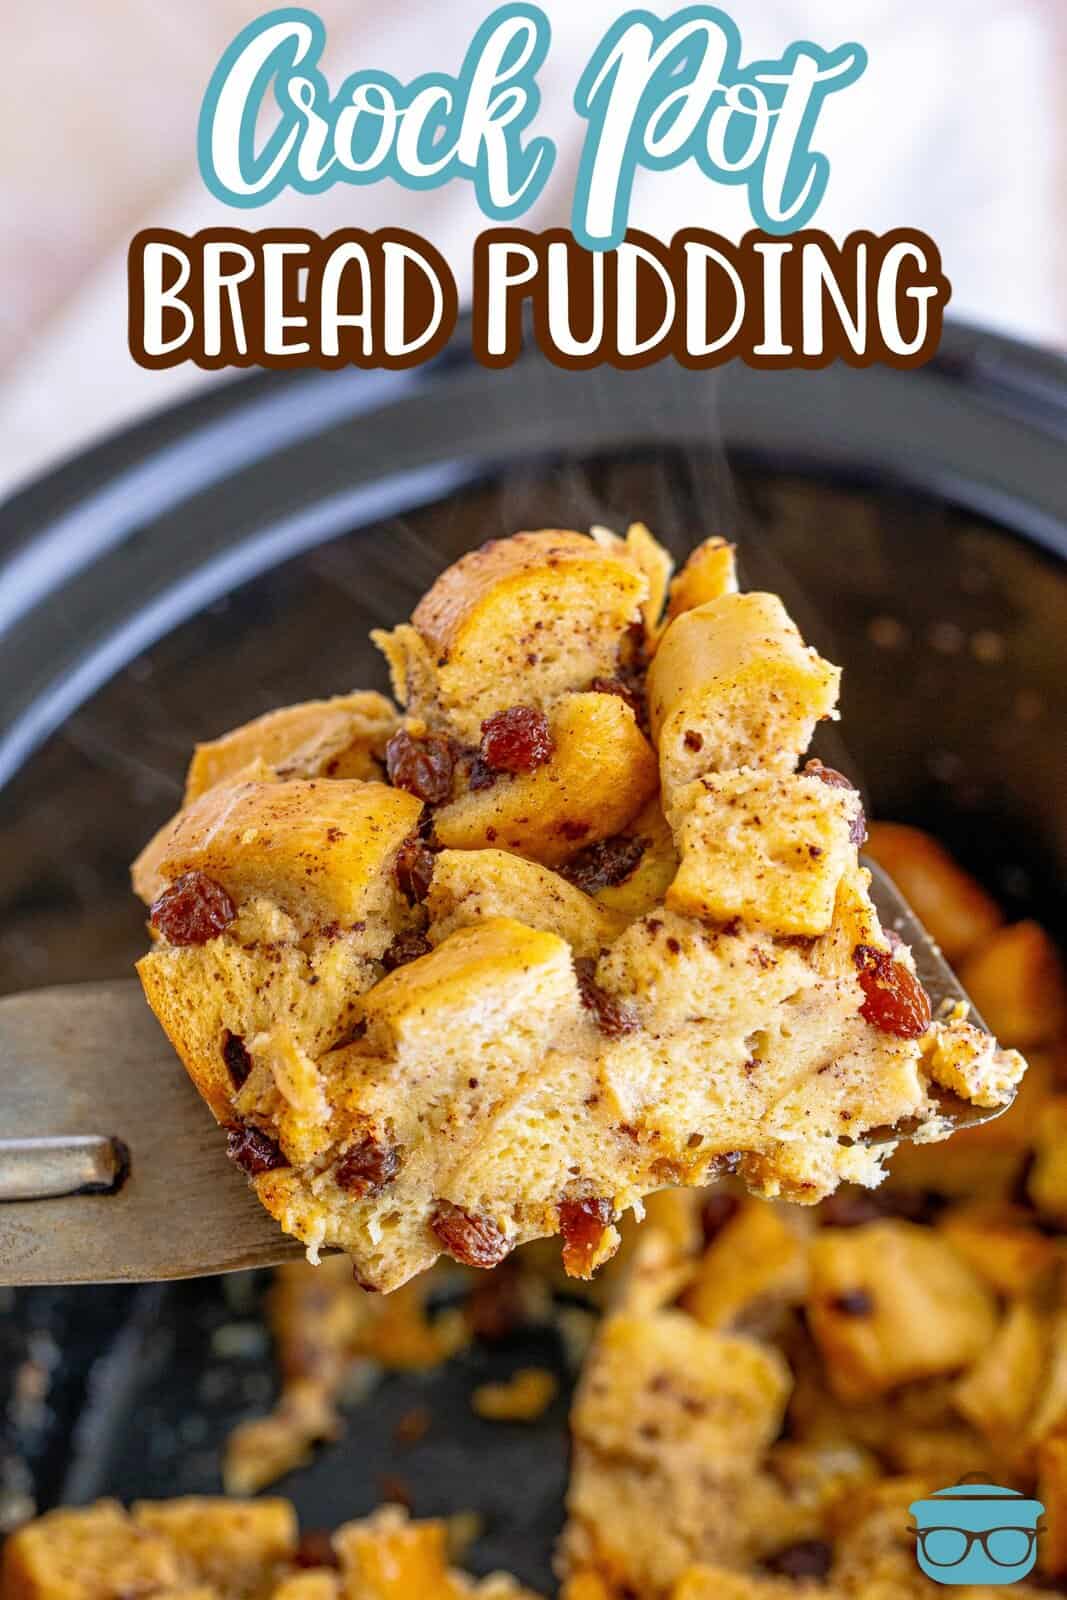 Spatula holding up a slice of the Crock Pot Bread Pudding out of crock pot Pinterest image.